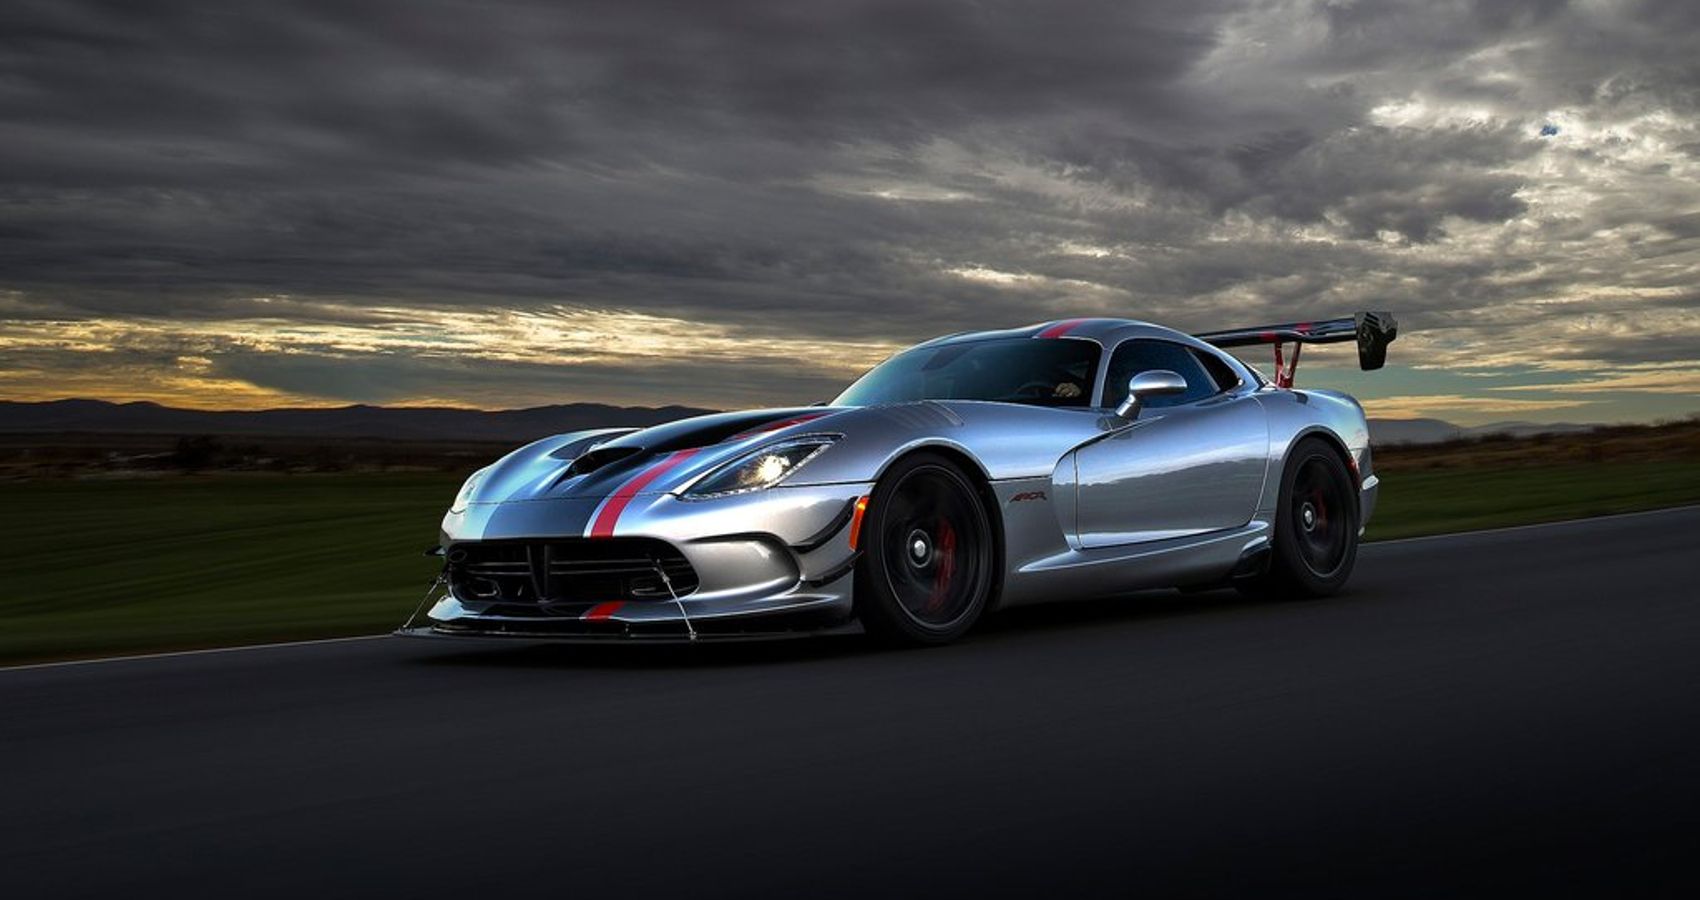 Dodge Viper ACR Extreme On The Move